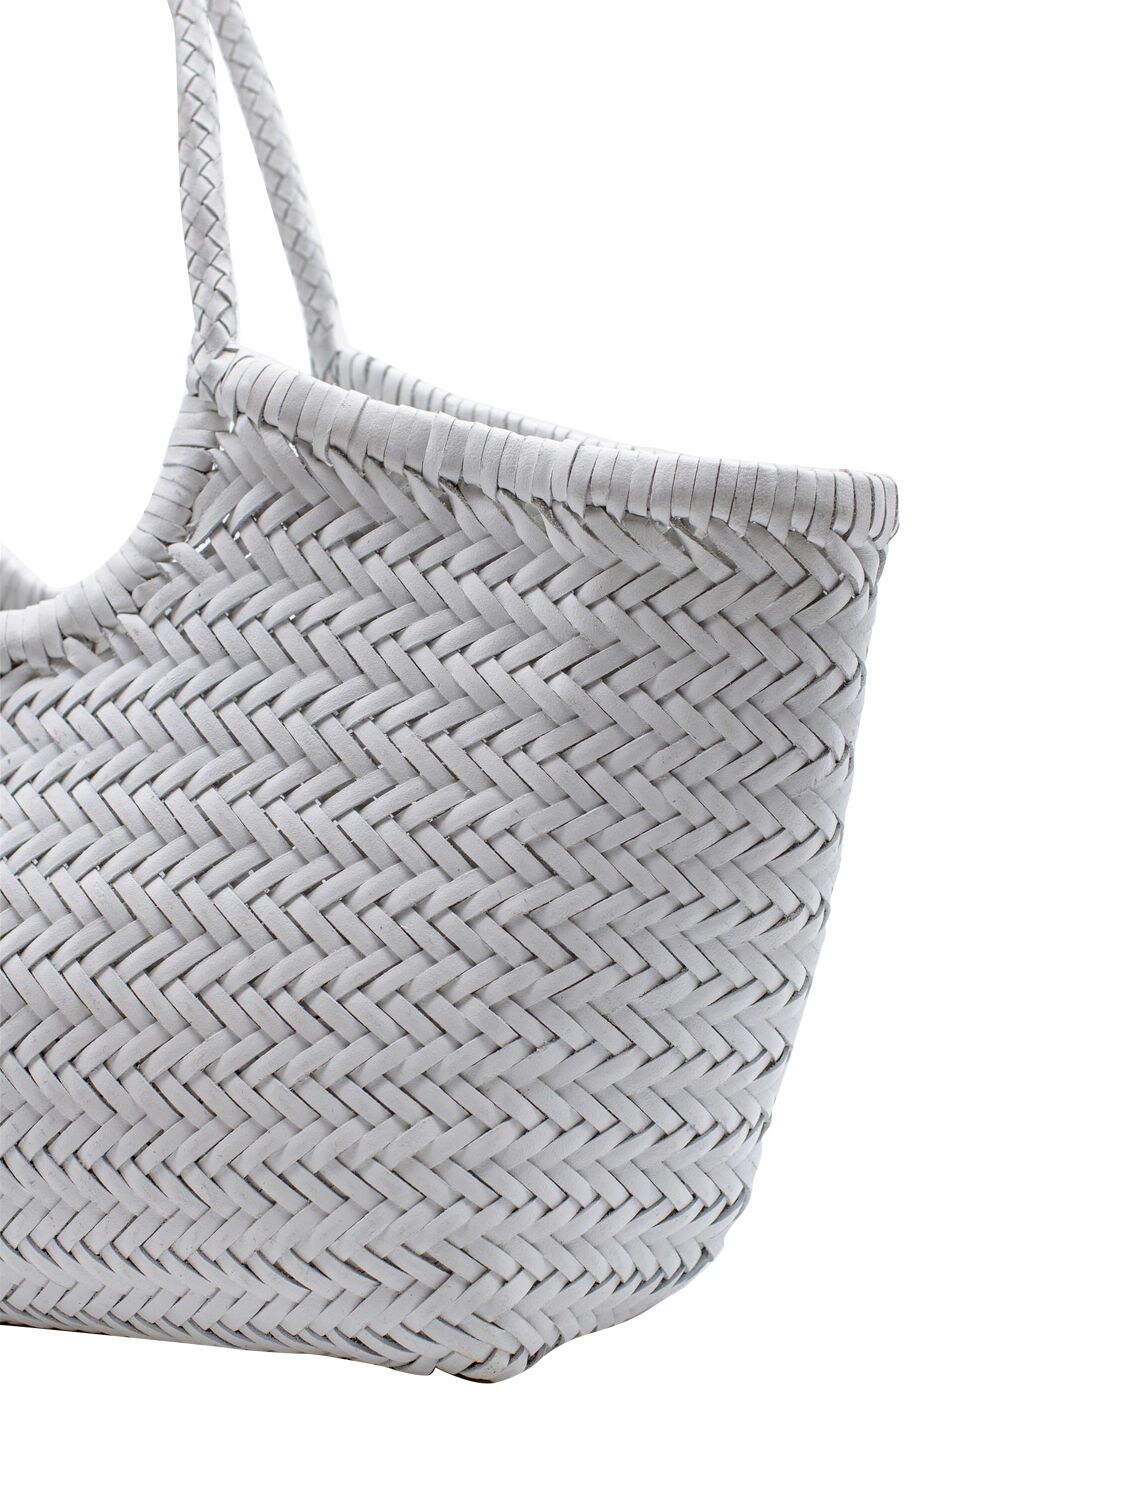 Dragon Diffusion Big Nantucket Woven Leather Basket Bag In White